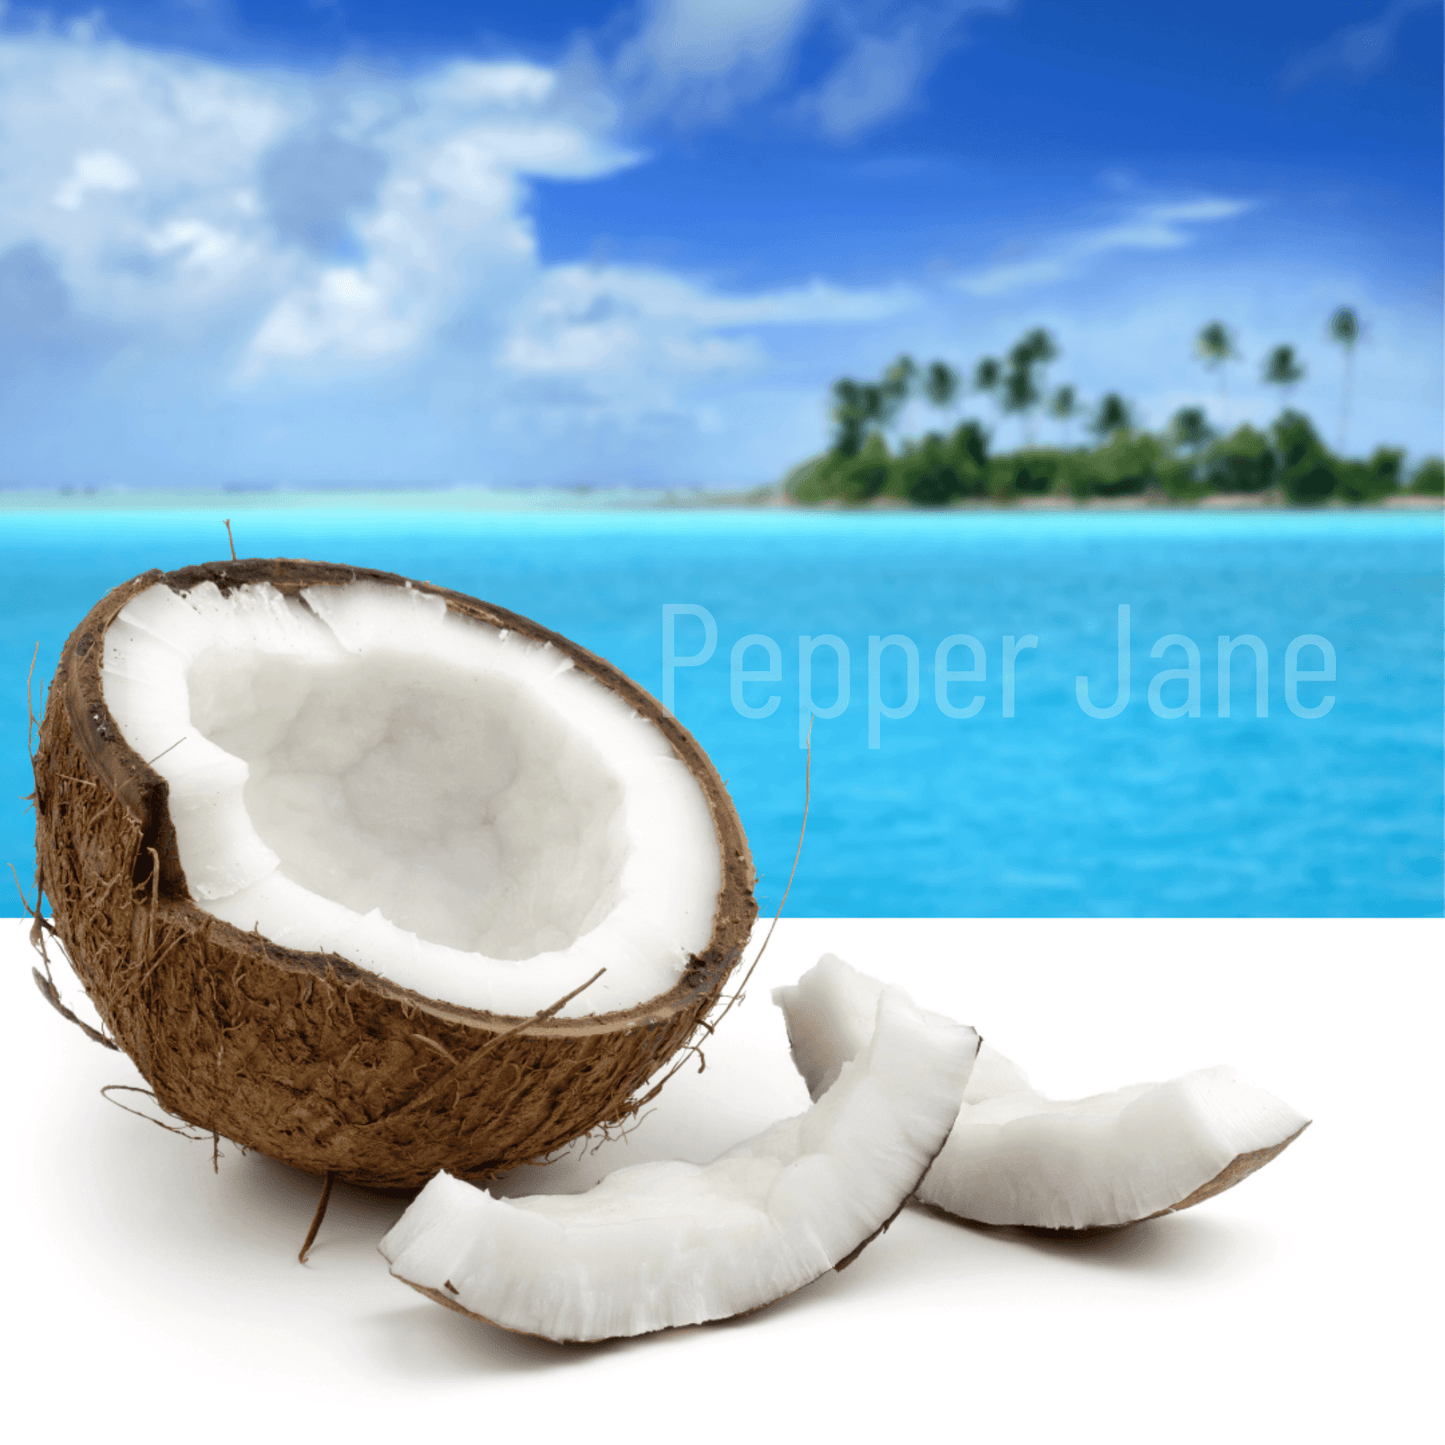 Fresh Coconut Fragrance Oil - Pepper Jane's Colors and Scents